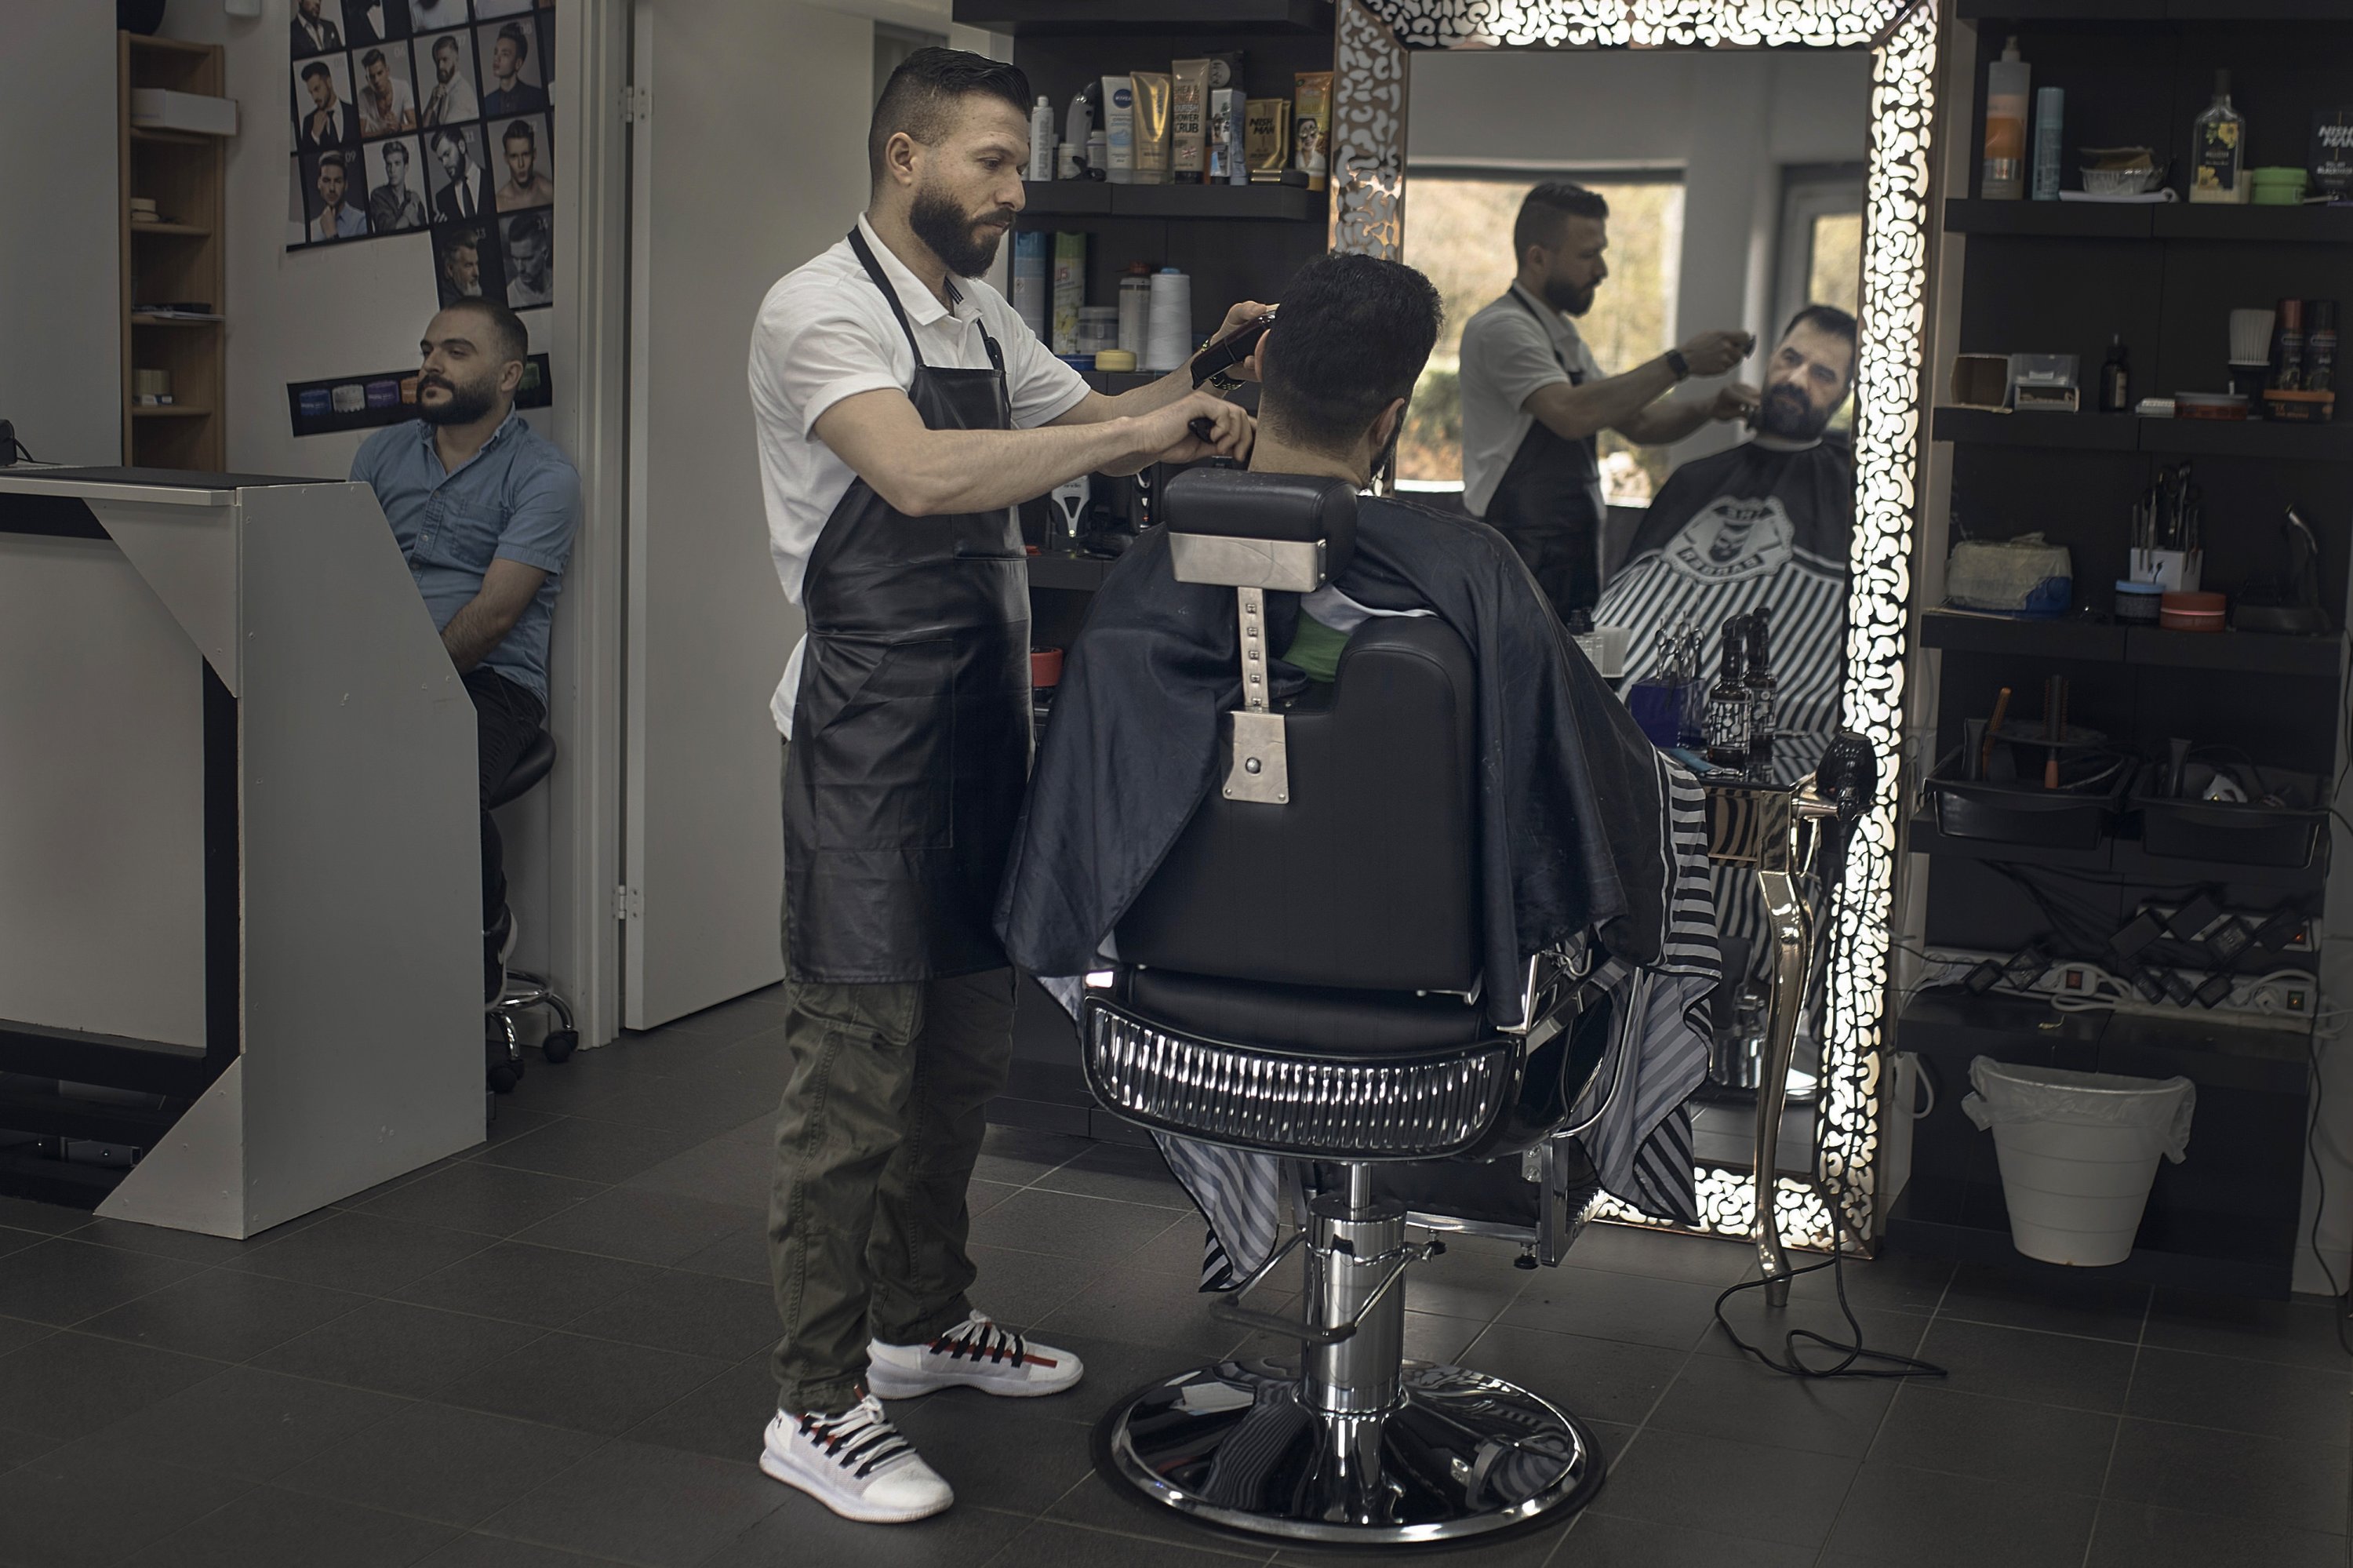 New health campaign committed to cutting hair and cutting minority